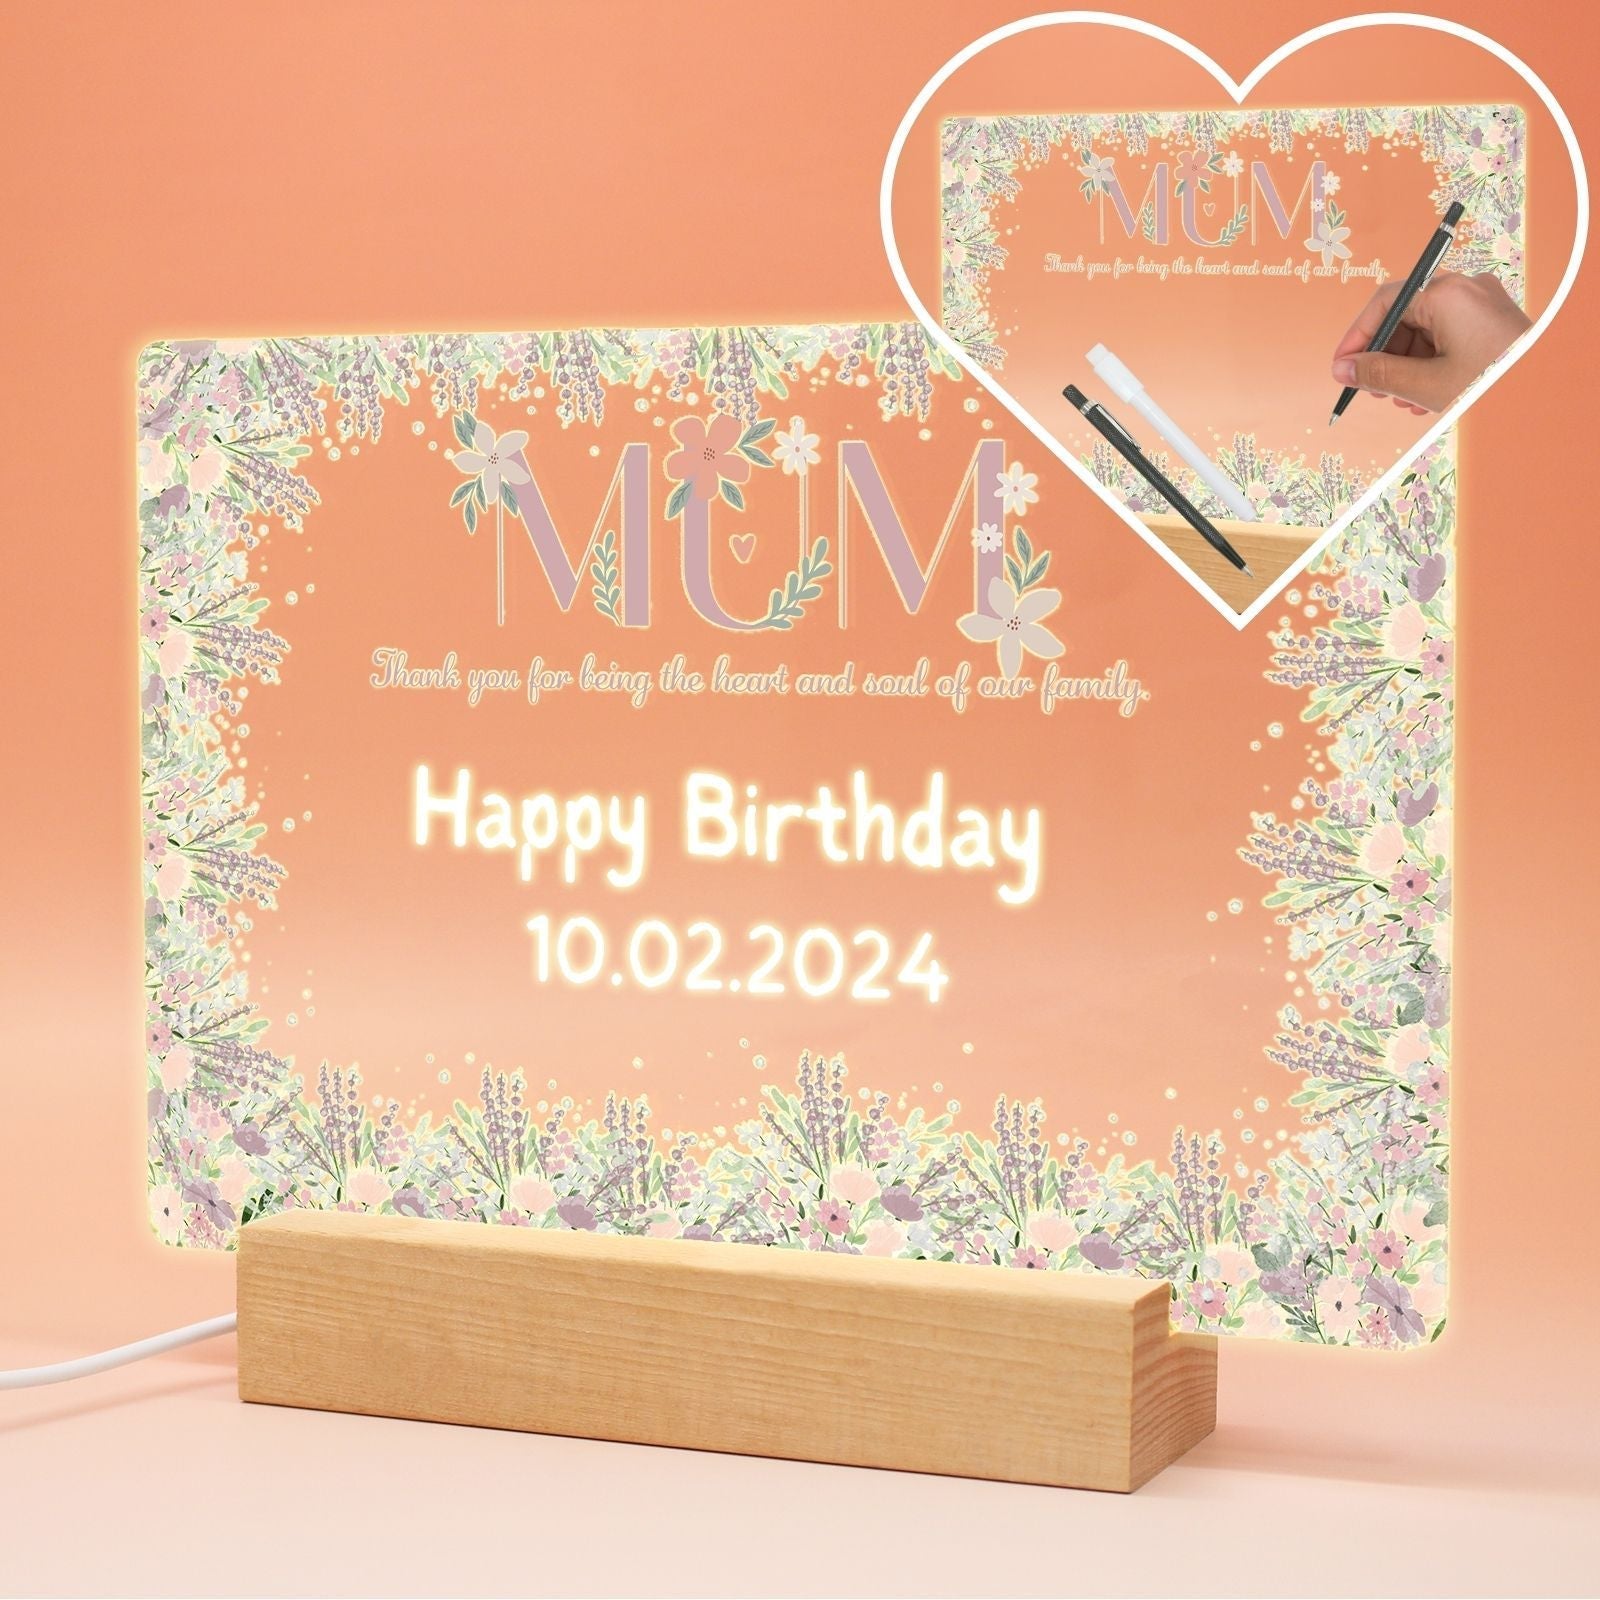 uniqicon mom gifts from daughters son custom Acrylic Desk Plaque Sign With drawing board & Wood LED Stand, Meaningful sentimental gifts for mama mother mom grandma mother in law - uniqicon